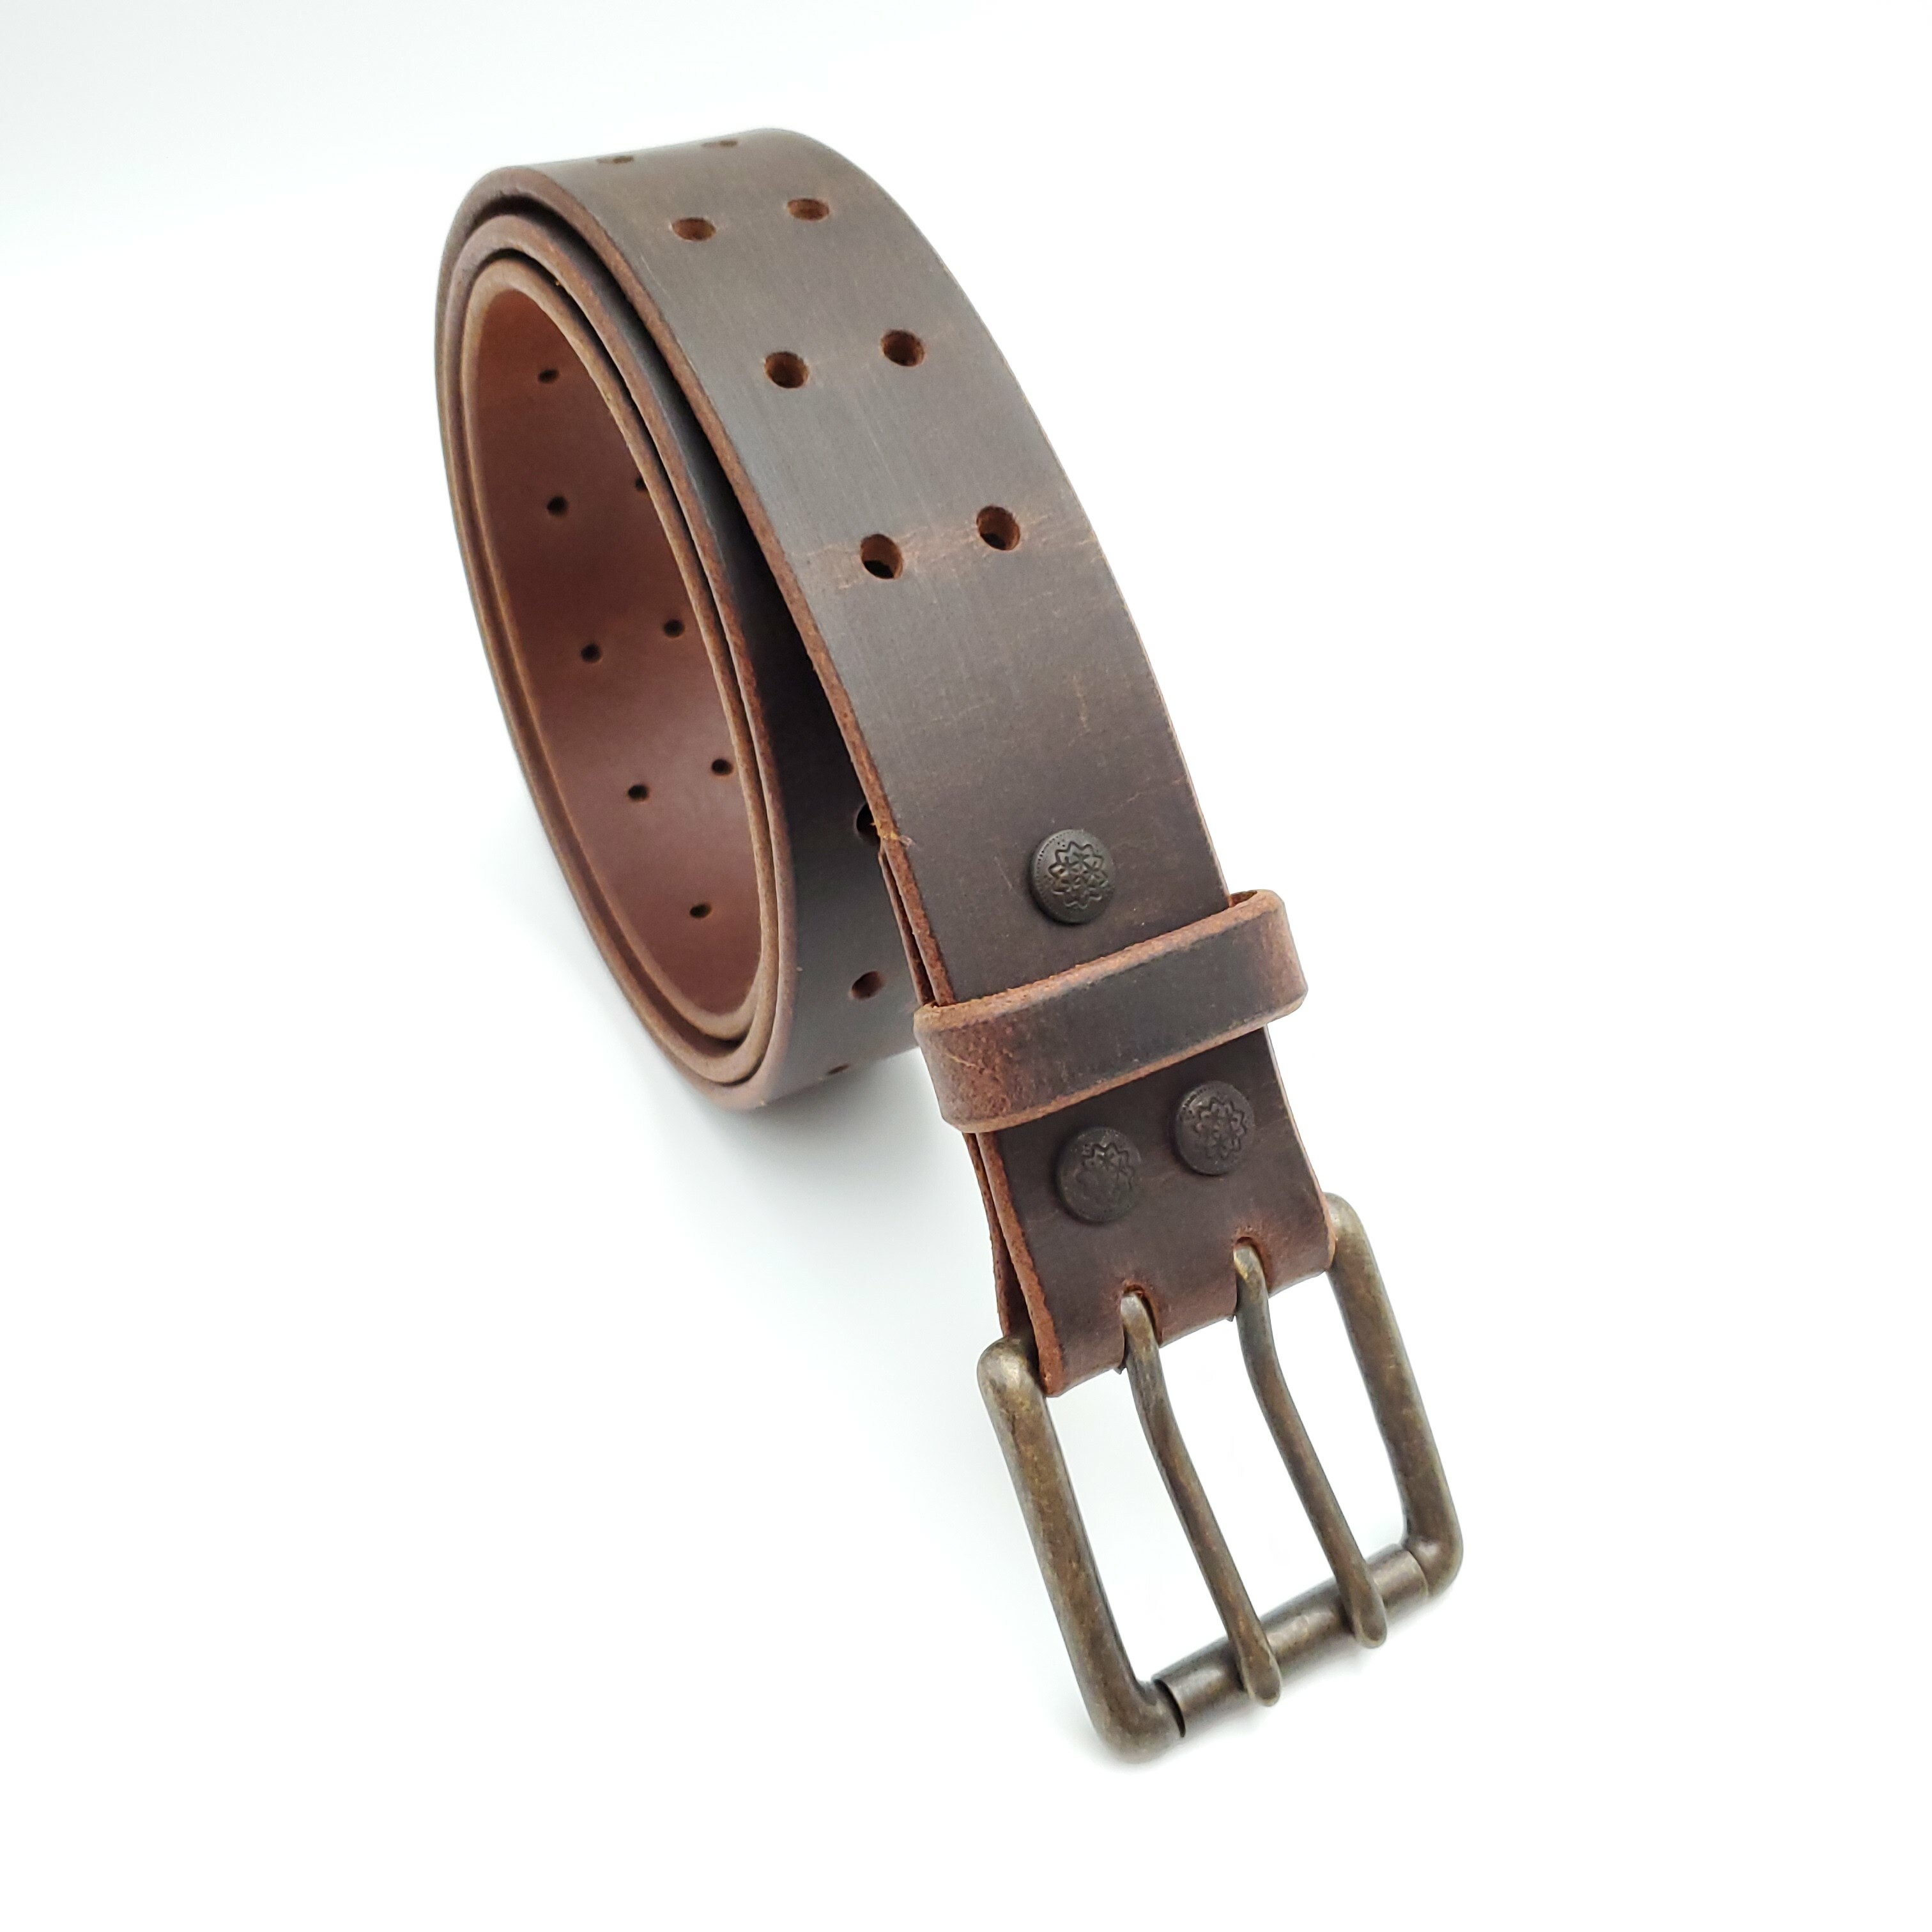 Distressed Brown Double Prong Belt